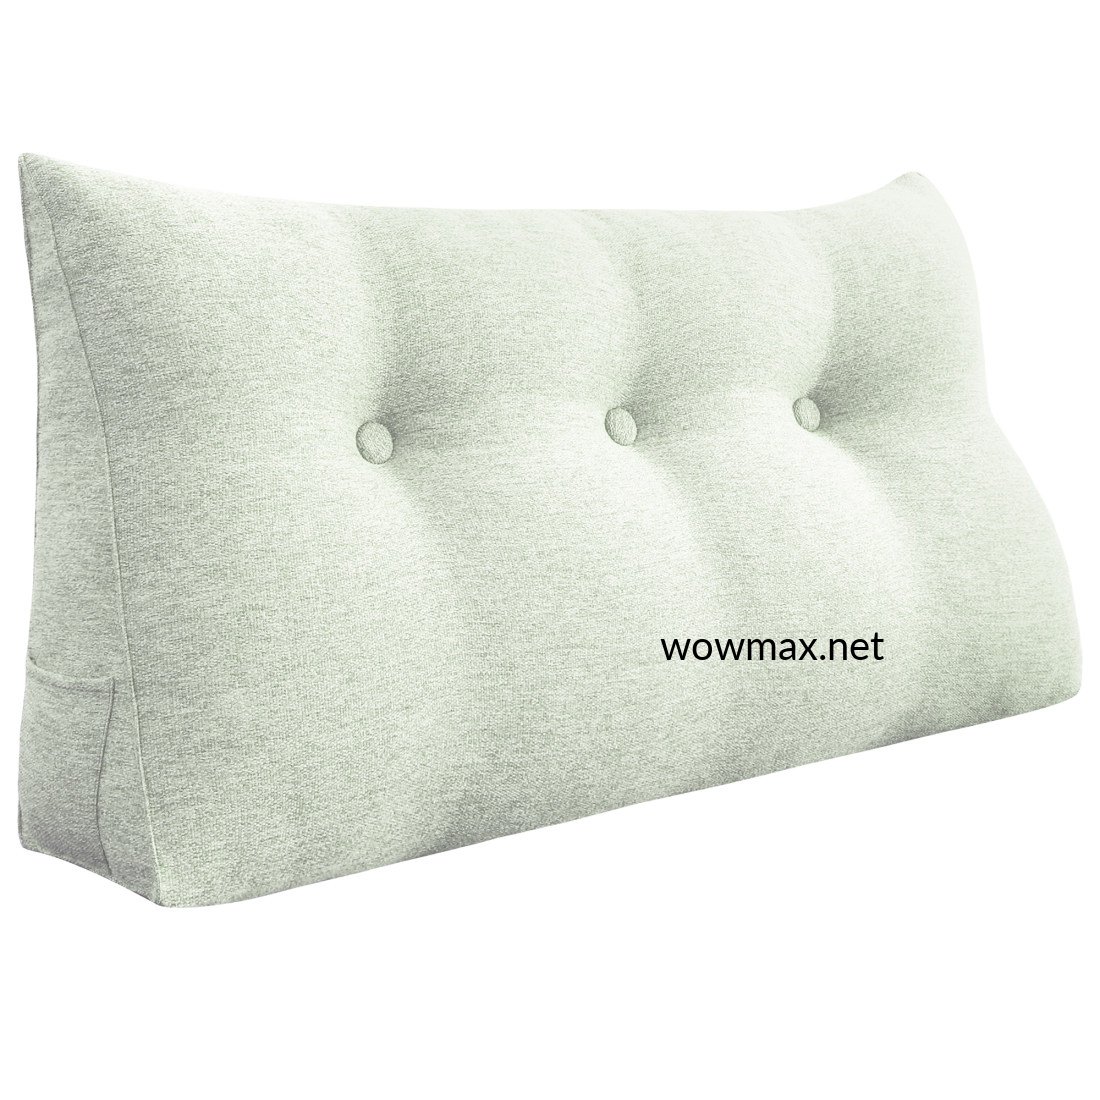 23x21x13 Bed Wedge Pillow